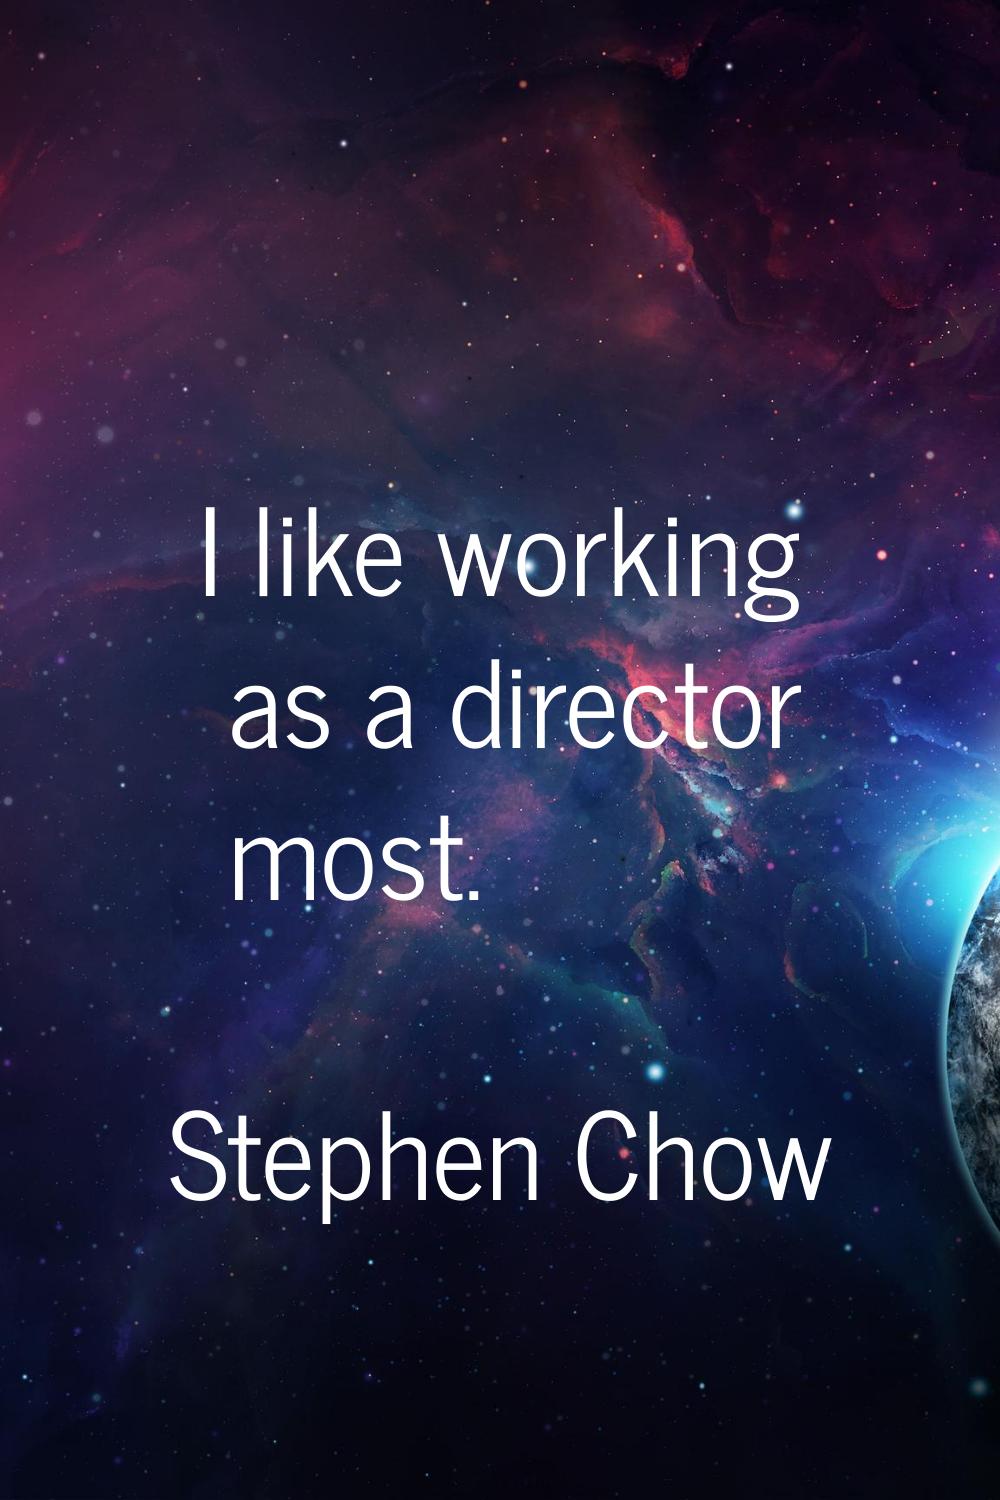 I like working as a director most.